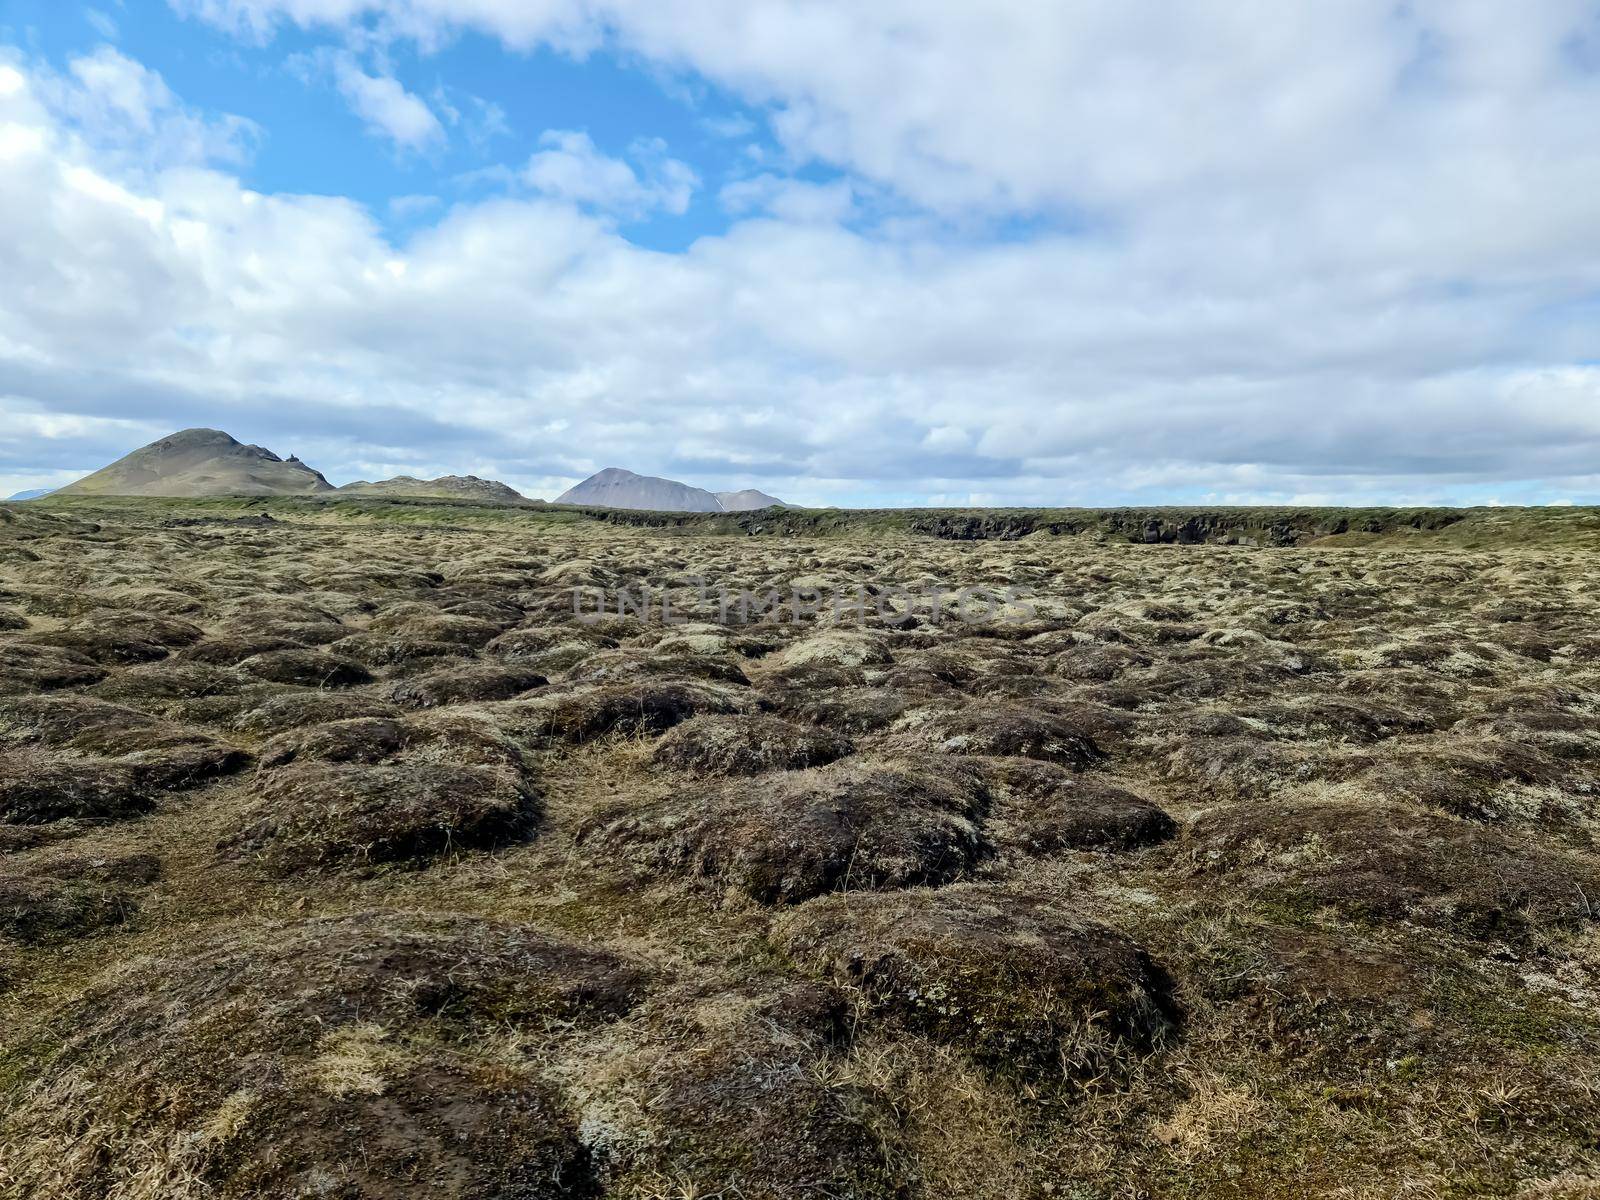 View of a dry landscape on Iceland - Myvatn with rocks and mountains